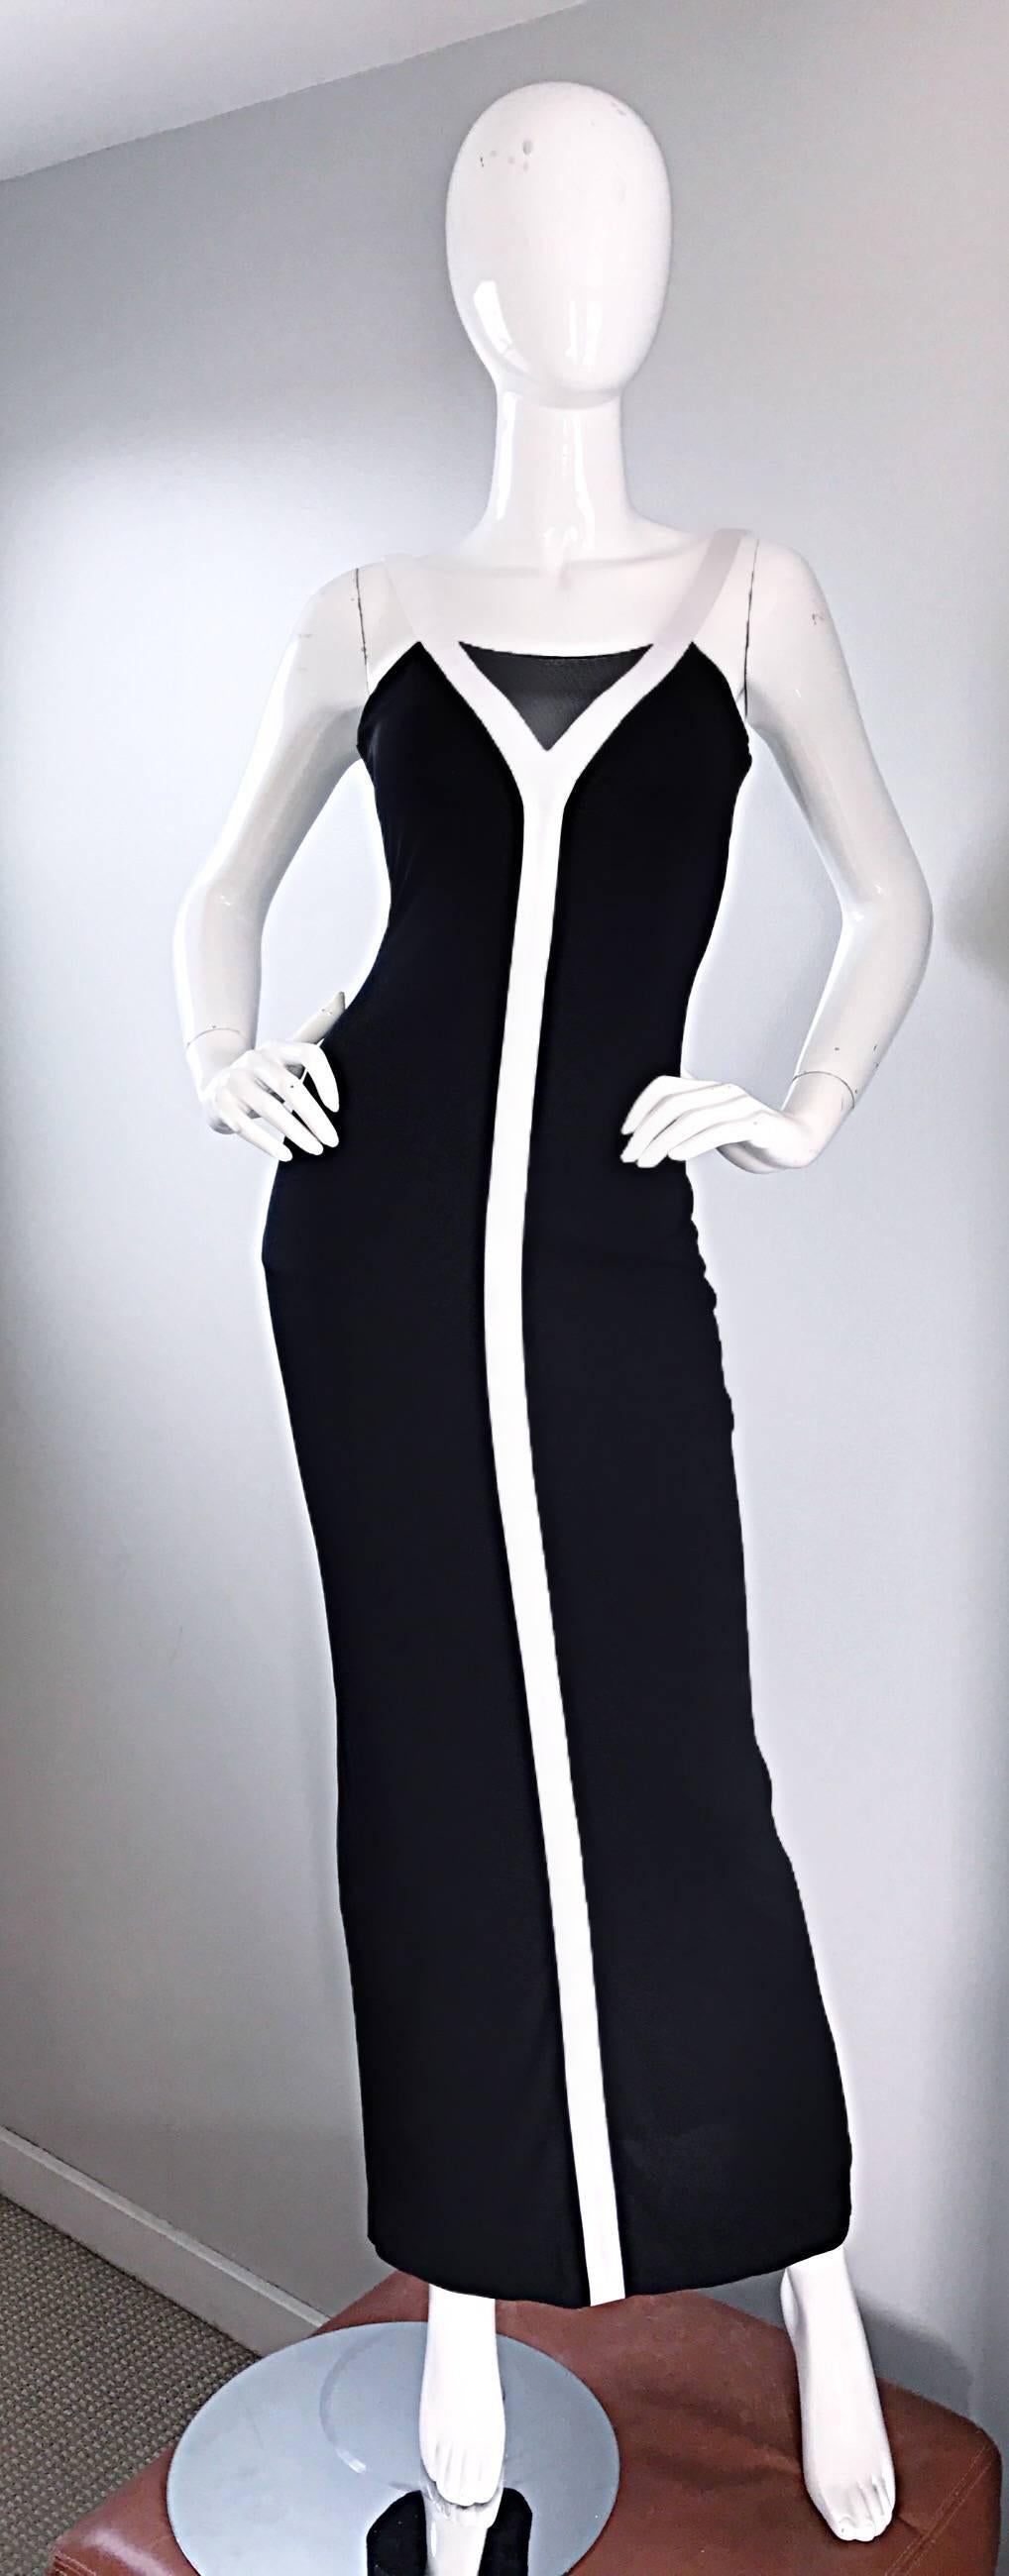 Iconic vintage 90s DOLCE & GABBANA black and white jersey full length evening dress! A close resemble to the vintage Valentino gown Julia Roberts wore to accept her Academy Award for 